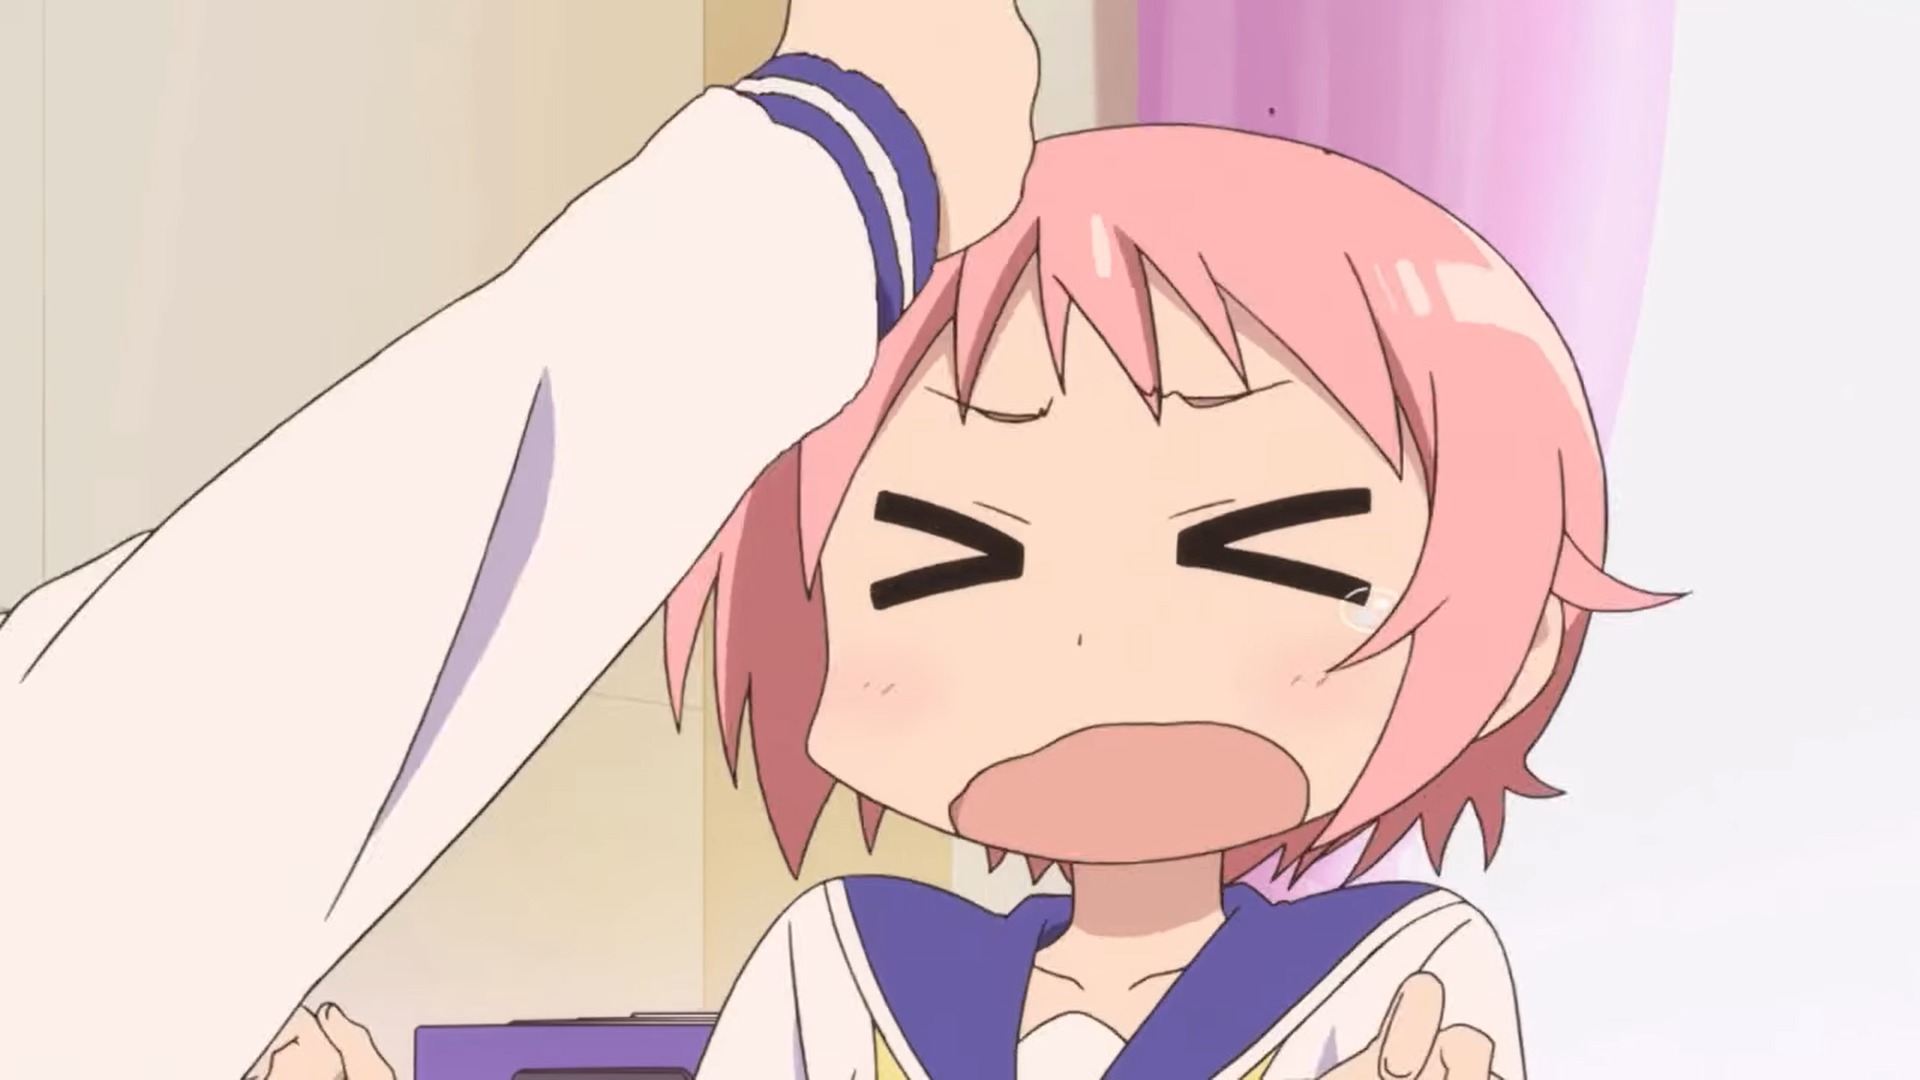 Yuyushiki character Yuzuko getting wacked on the forehead by Yui, who is out of frame except for her arm